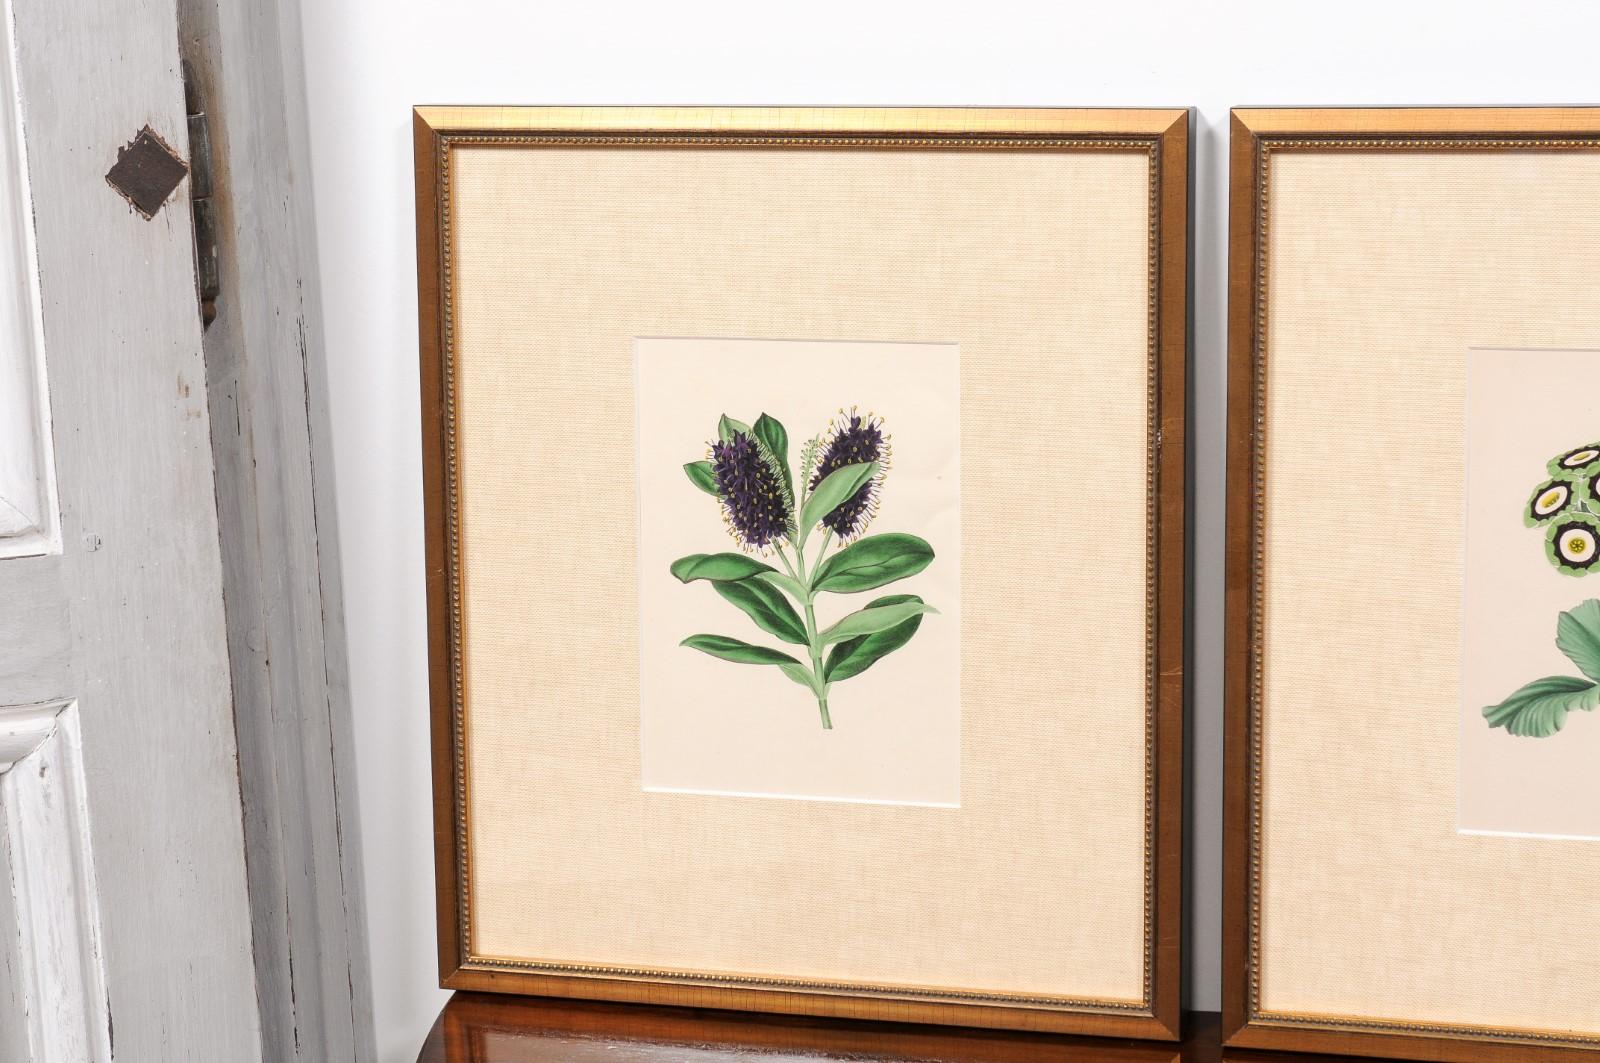  Victorian Floral Prints from The Museum of Flowers by Mary Elizabeth Rosenberg For Sale 11